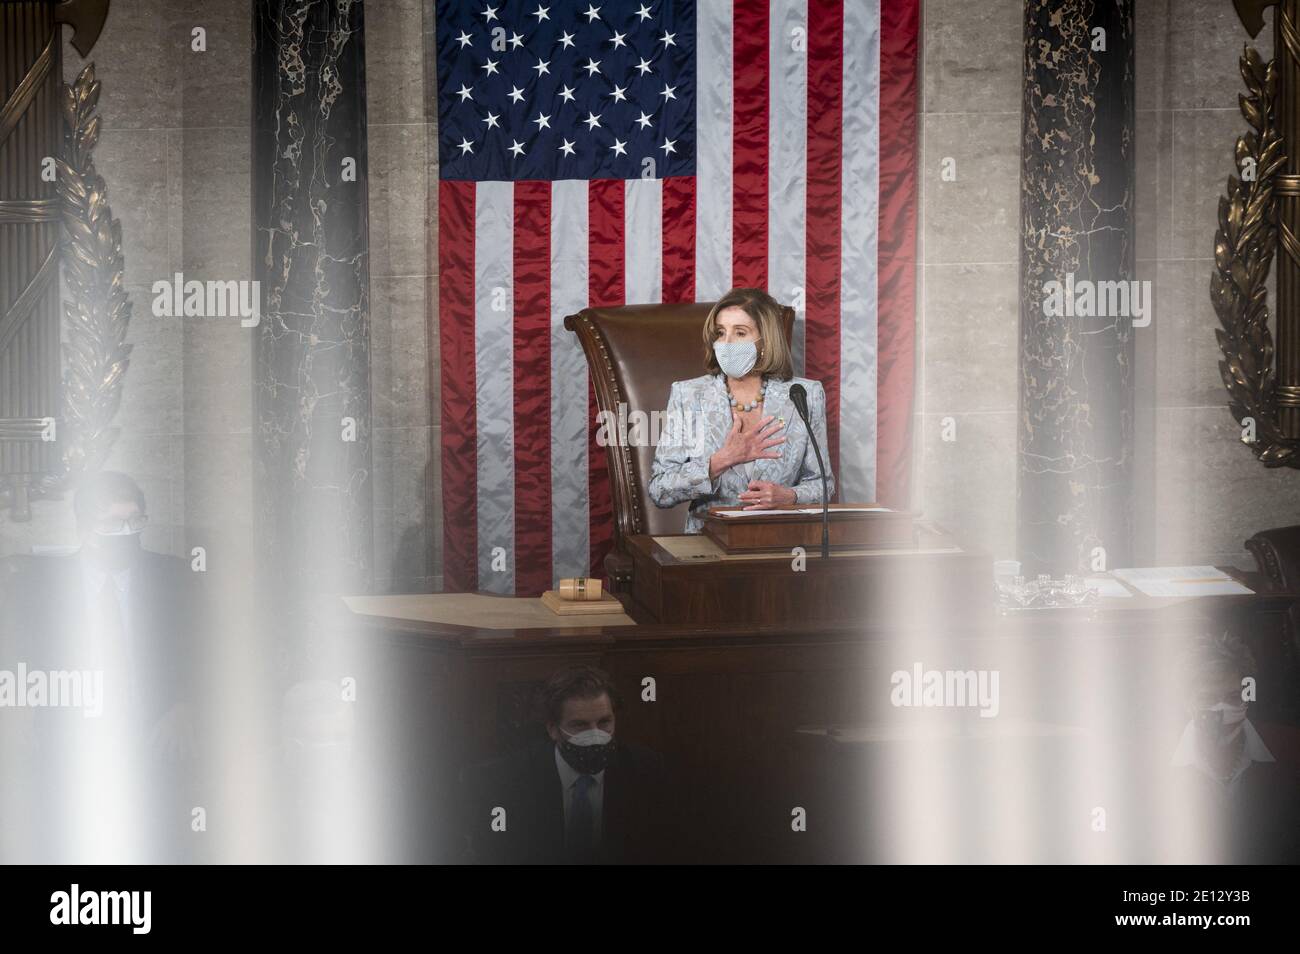 Speaker of the House Nancy Pelosi, D-Calif., speaks on the House floor in the Capitol after becoming Speaker of the 117th Congress on Sunday, January 3, 2021. Photo By Bill Clark/Pool/ABACAPRESS.COM Stock Photo